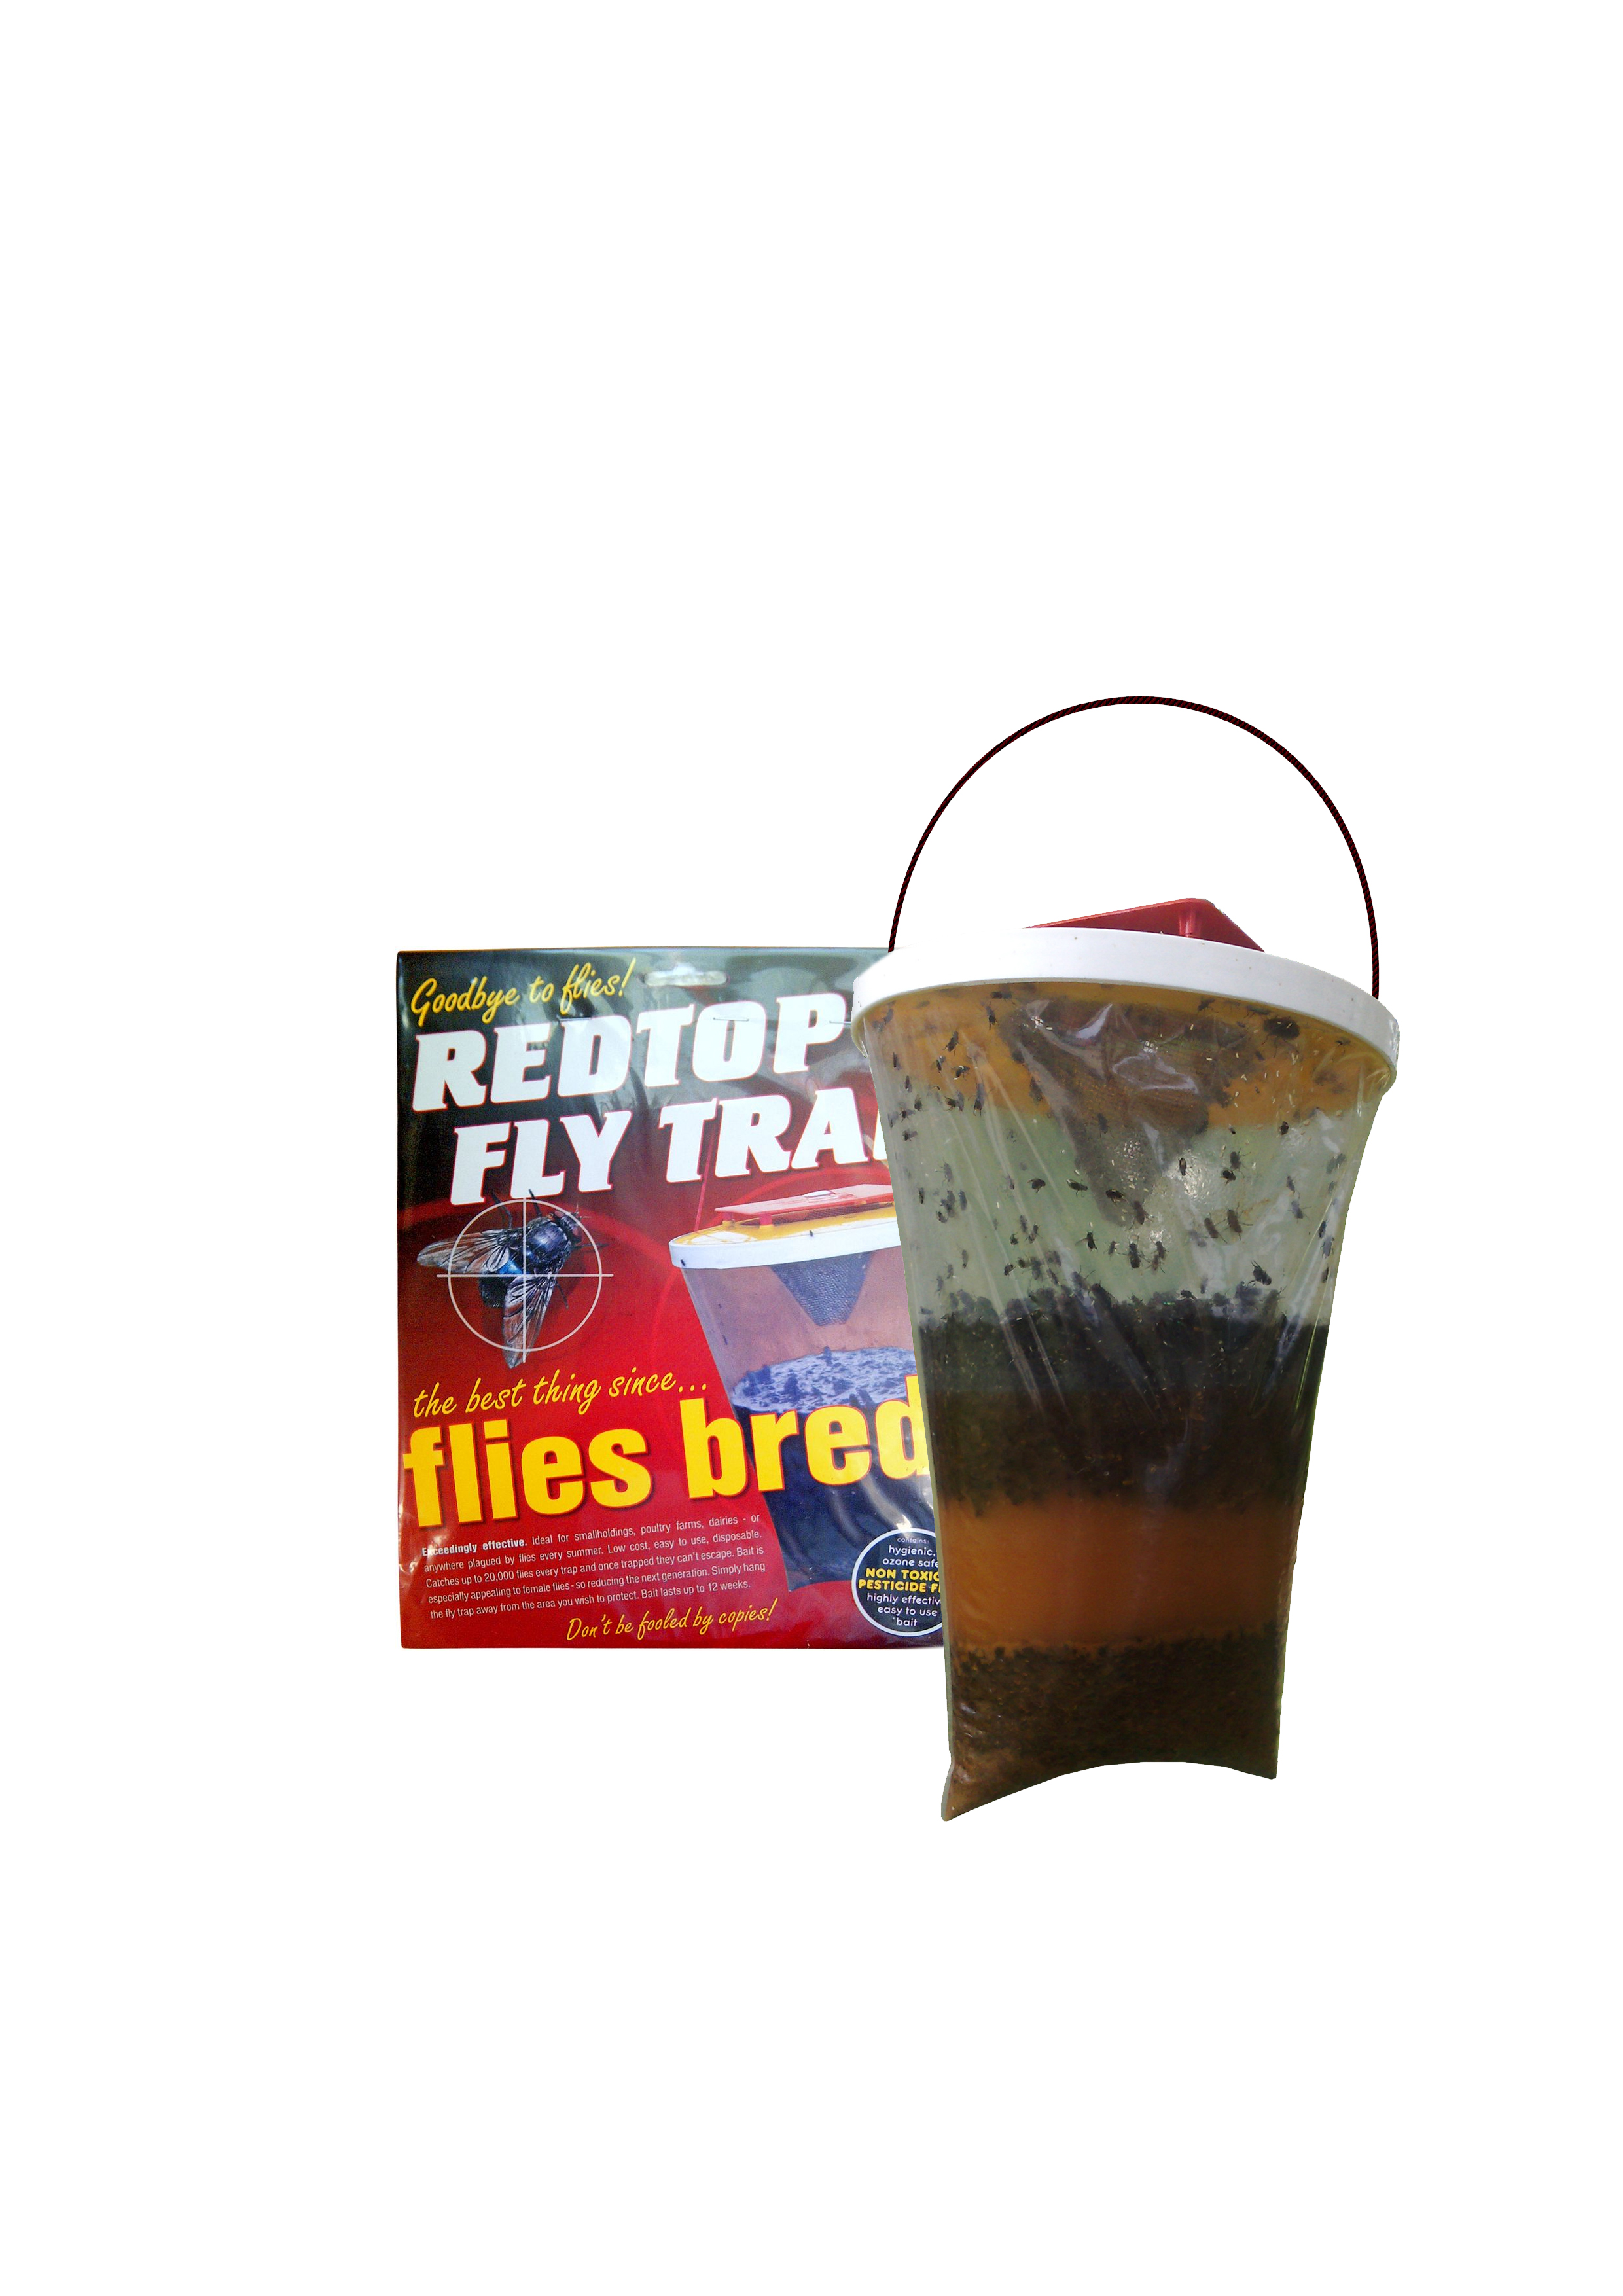  Red Top Fly Trap